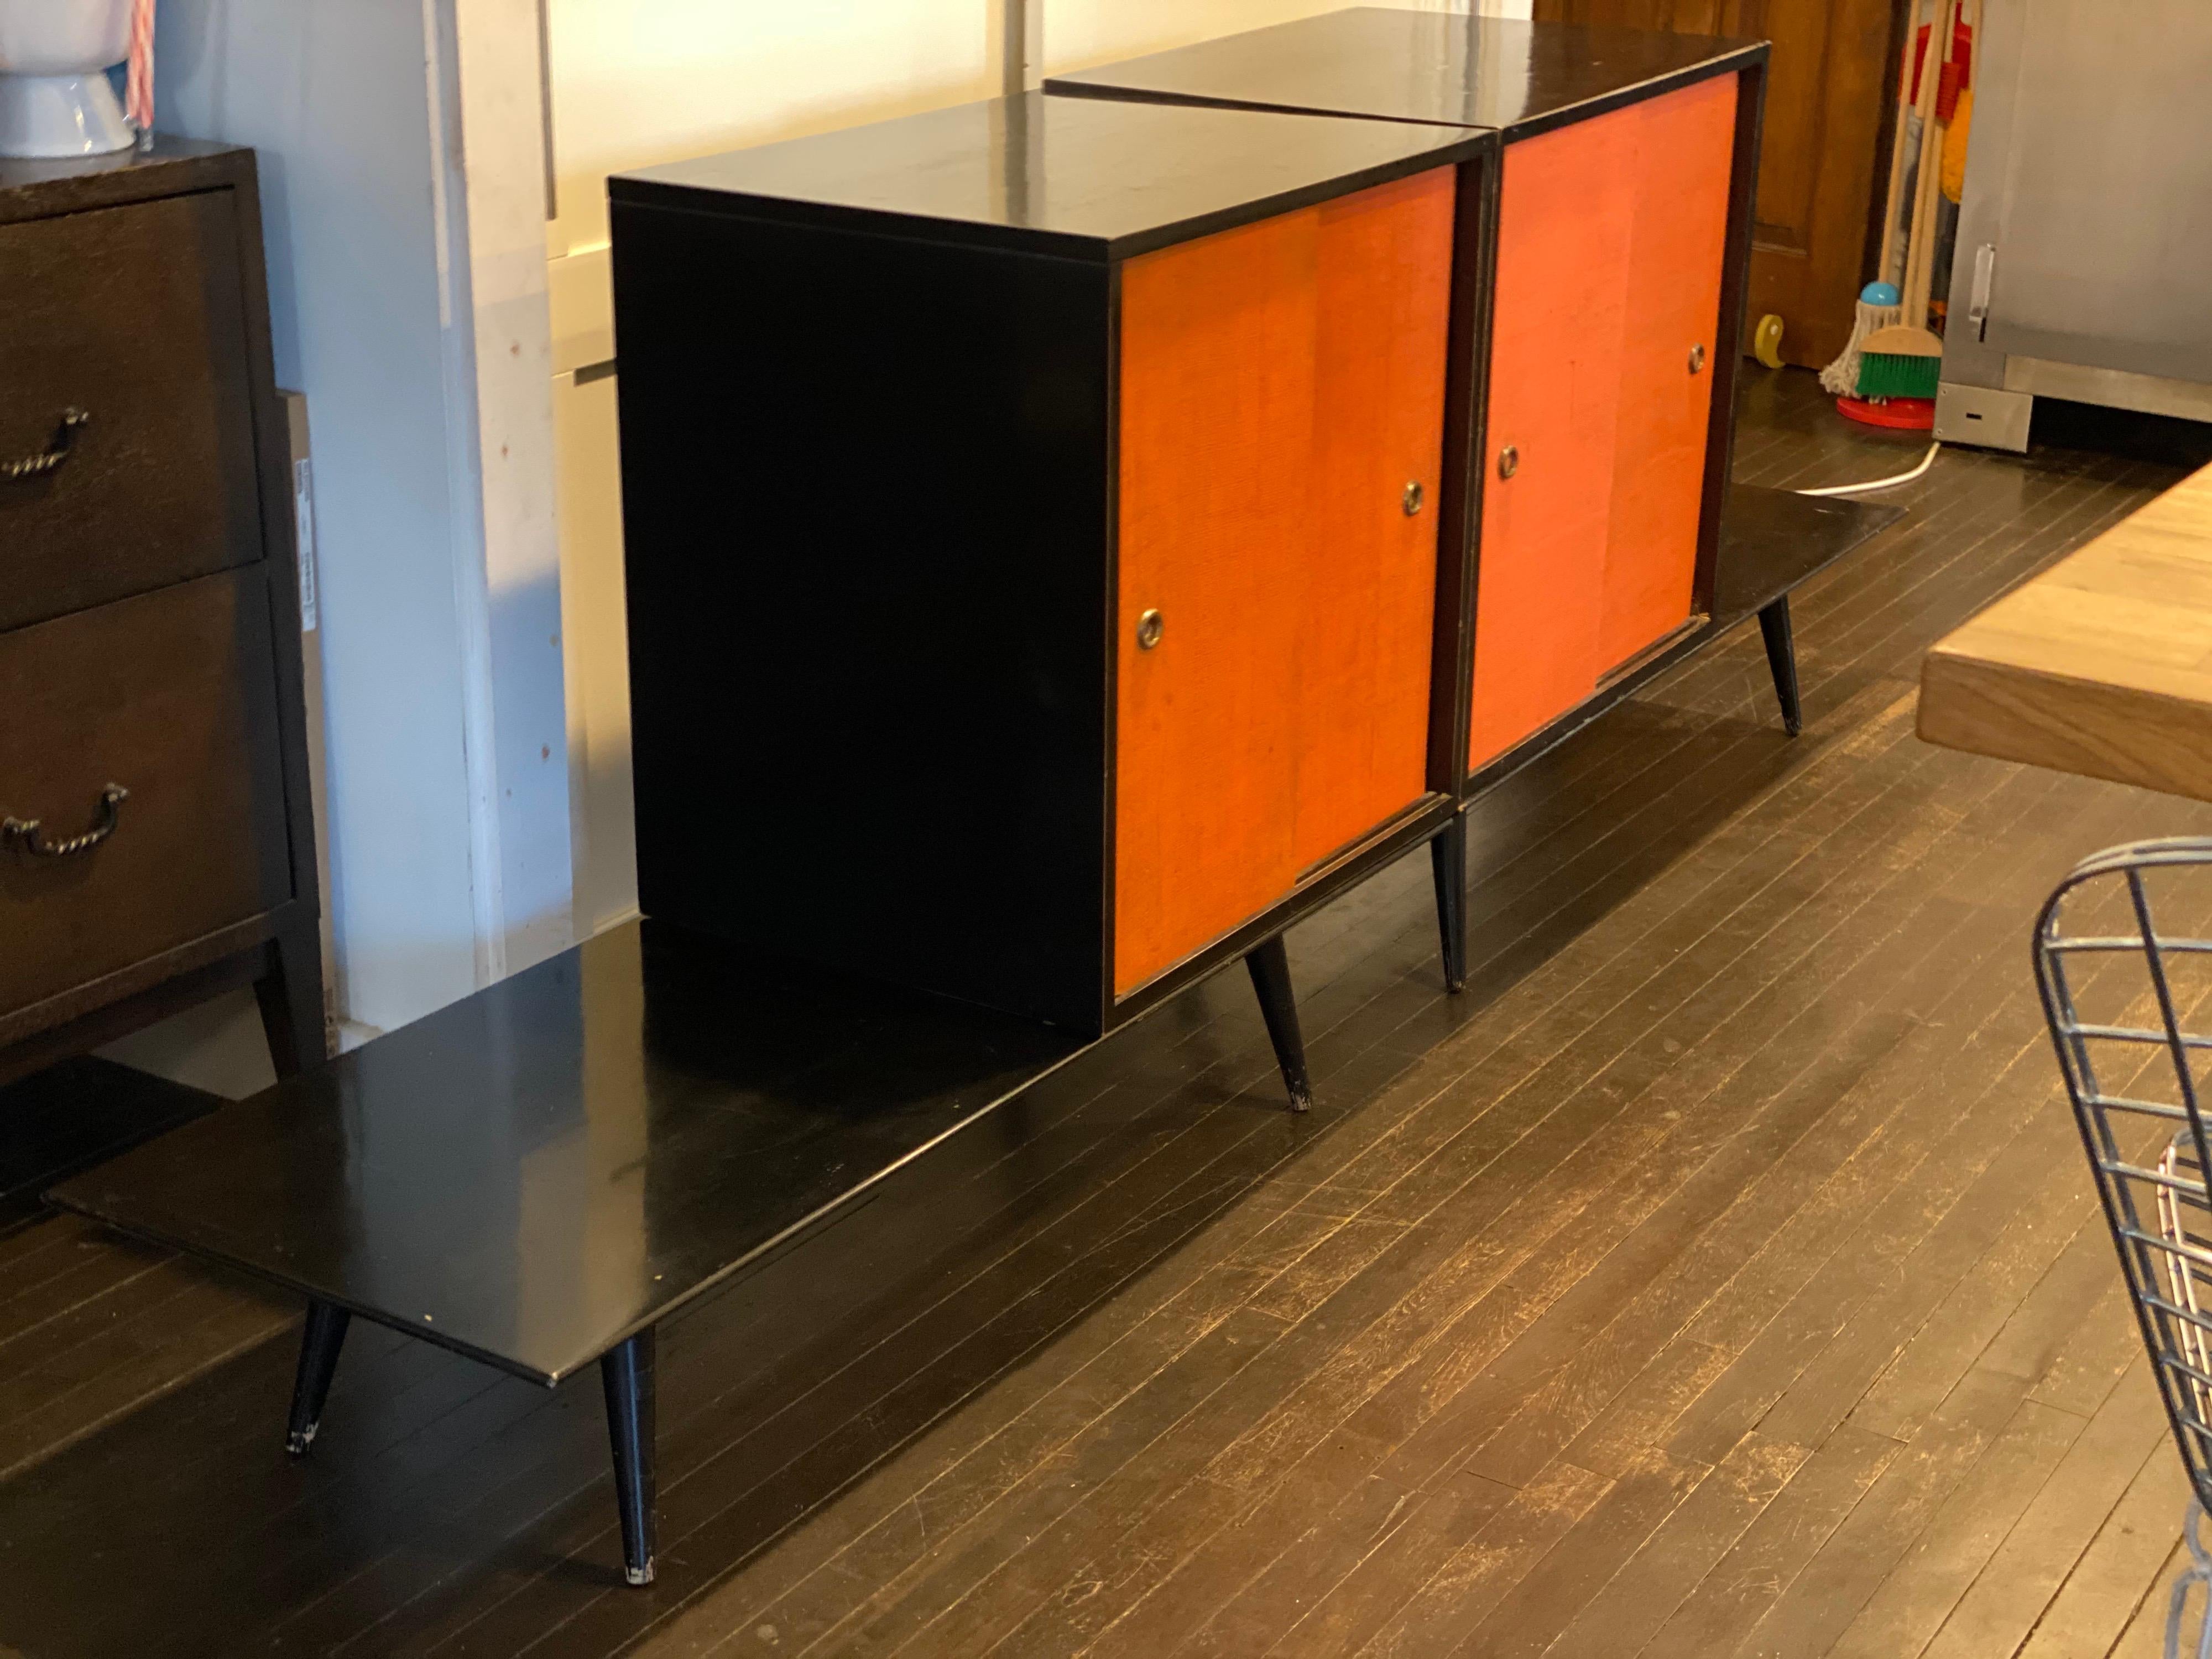 Midcentury Paul McCobb Planner Group four piece cabinets with benches in original orange doors with black lacquer finish.
Manufactured by Winchendon Furniture Company, 1950s.
This modular system can be set up in a few different combinations. Each